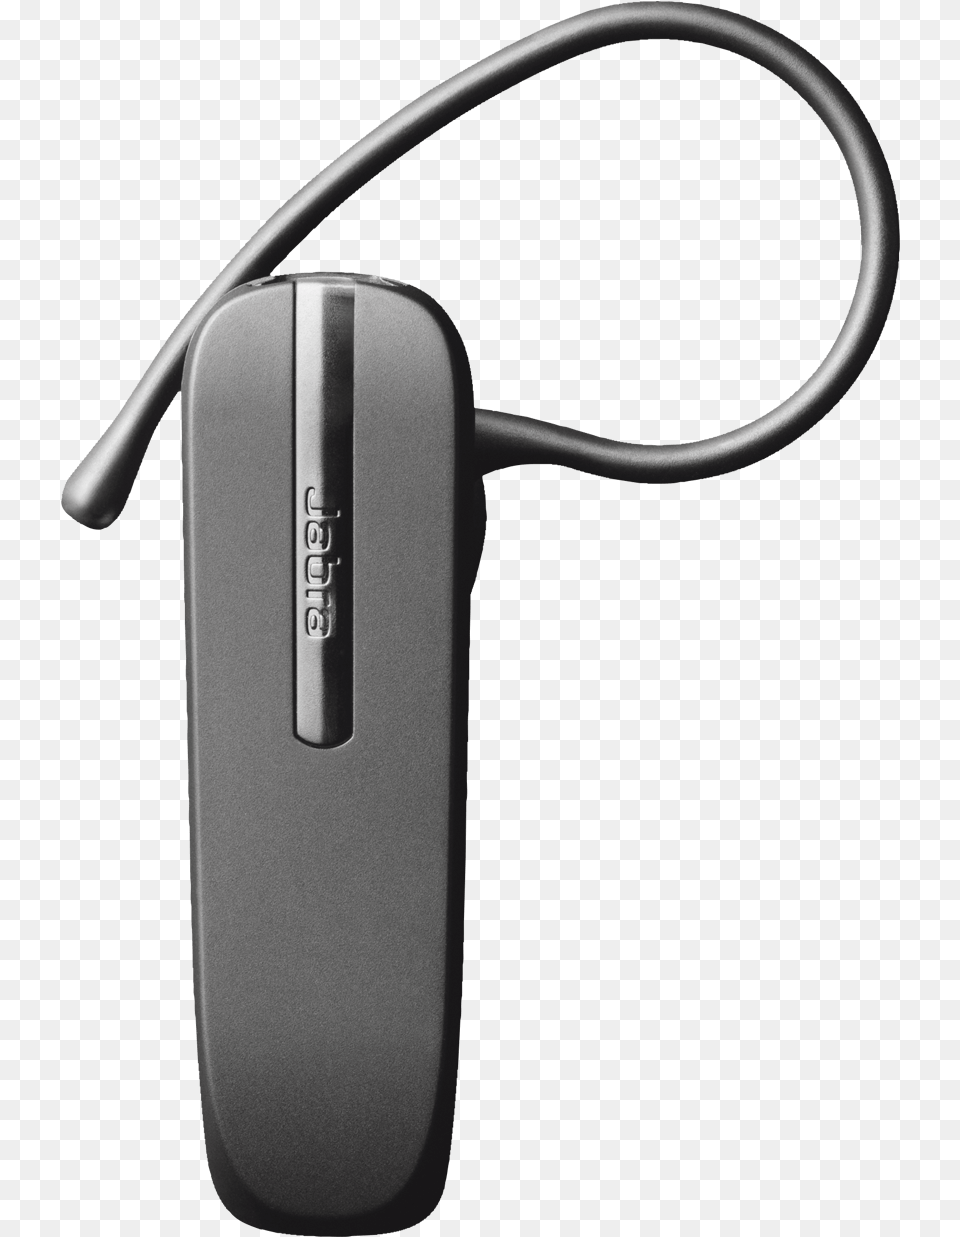 Jabra Bt2047 Bluetooth Headset For Mobile Devices Bluetooth Headphones Low Price, Computer Hardware, Electronics, Hardware, Electrical Device Png Image